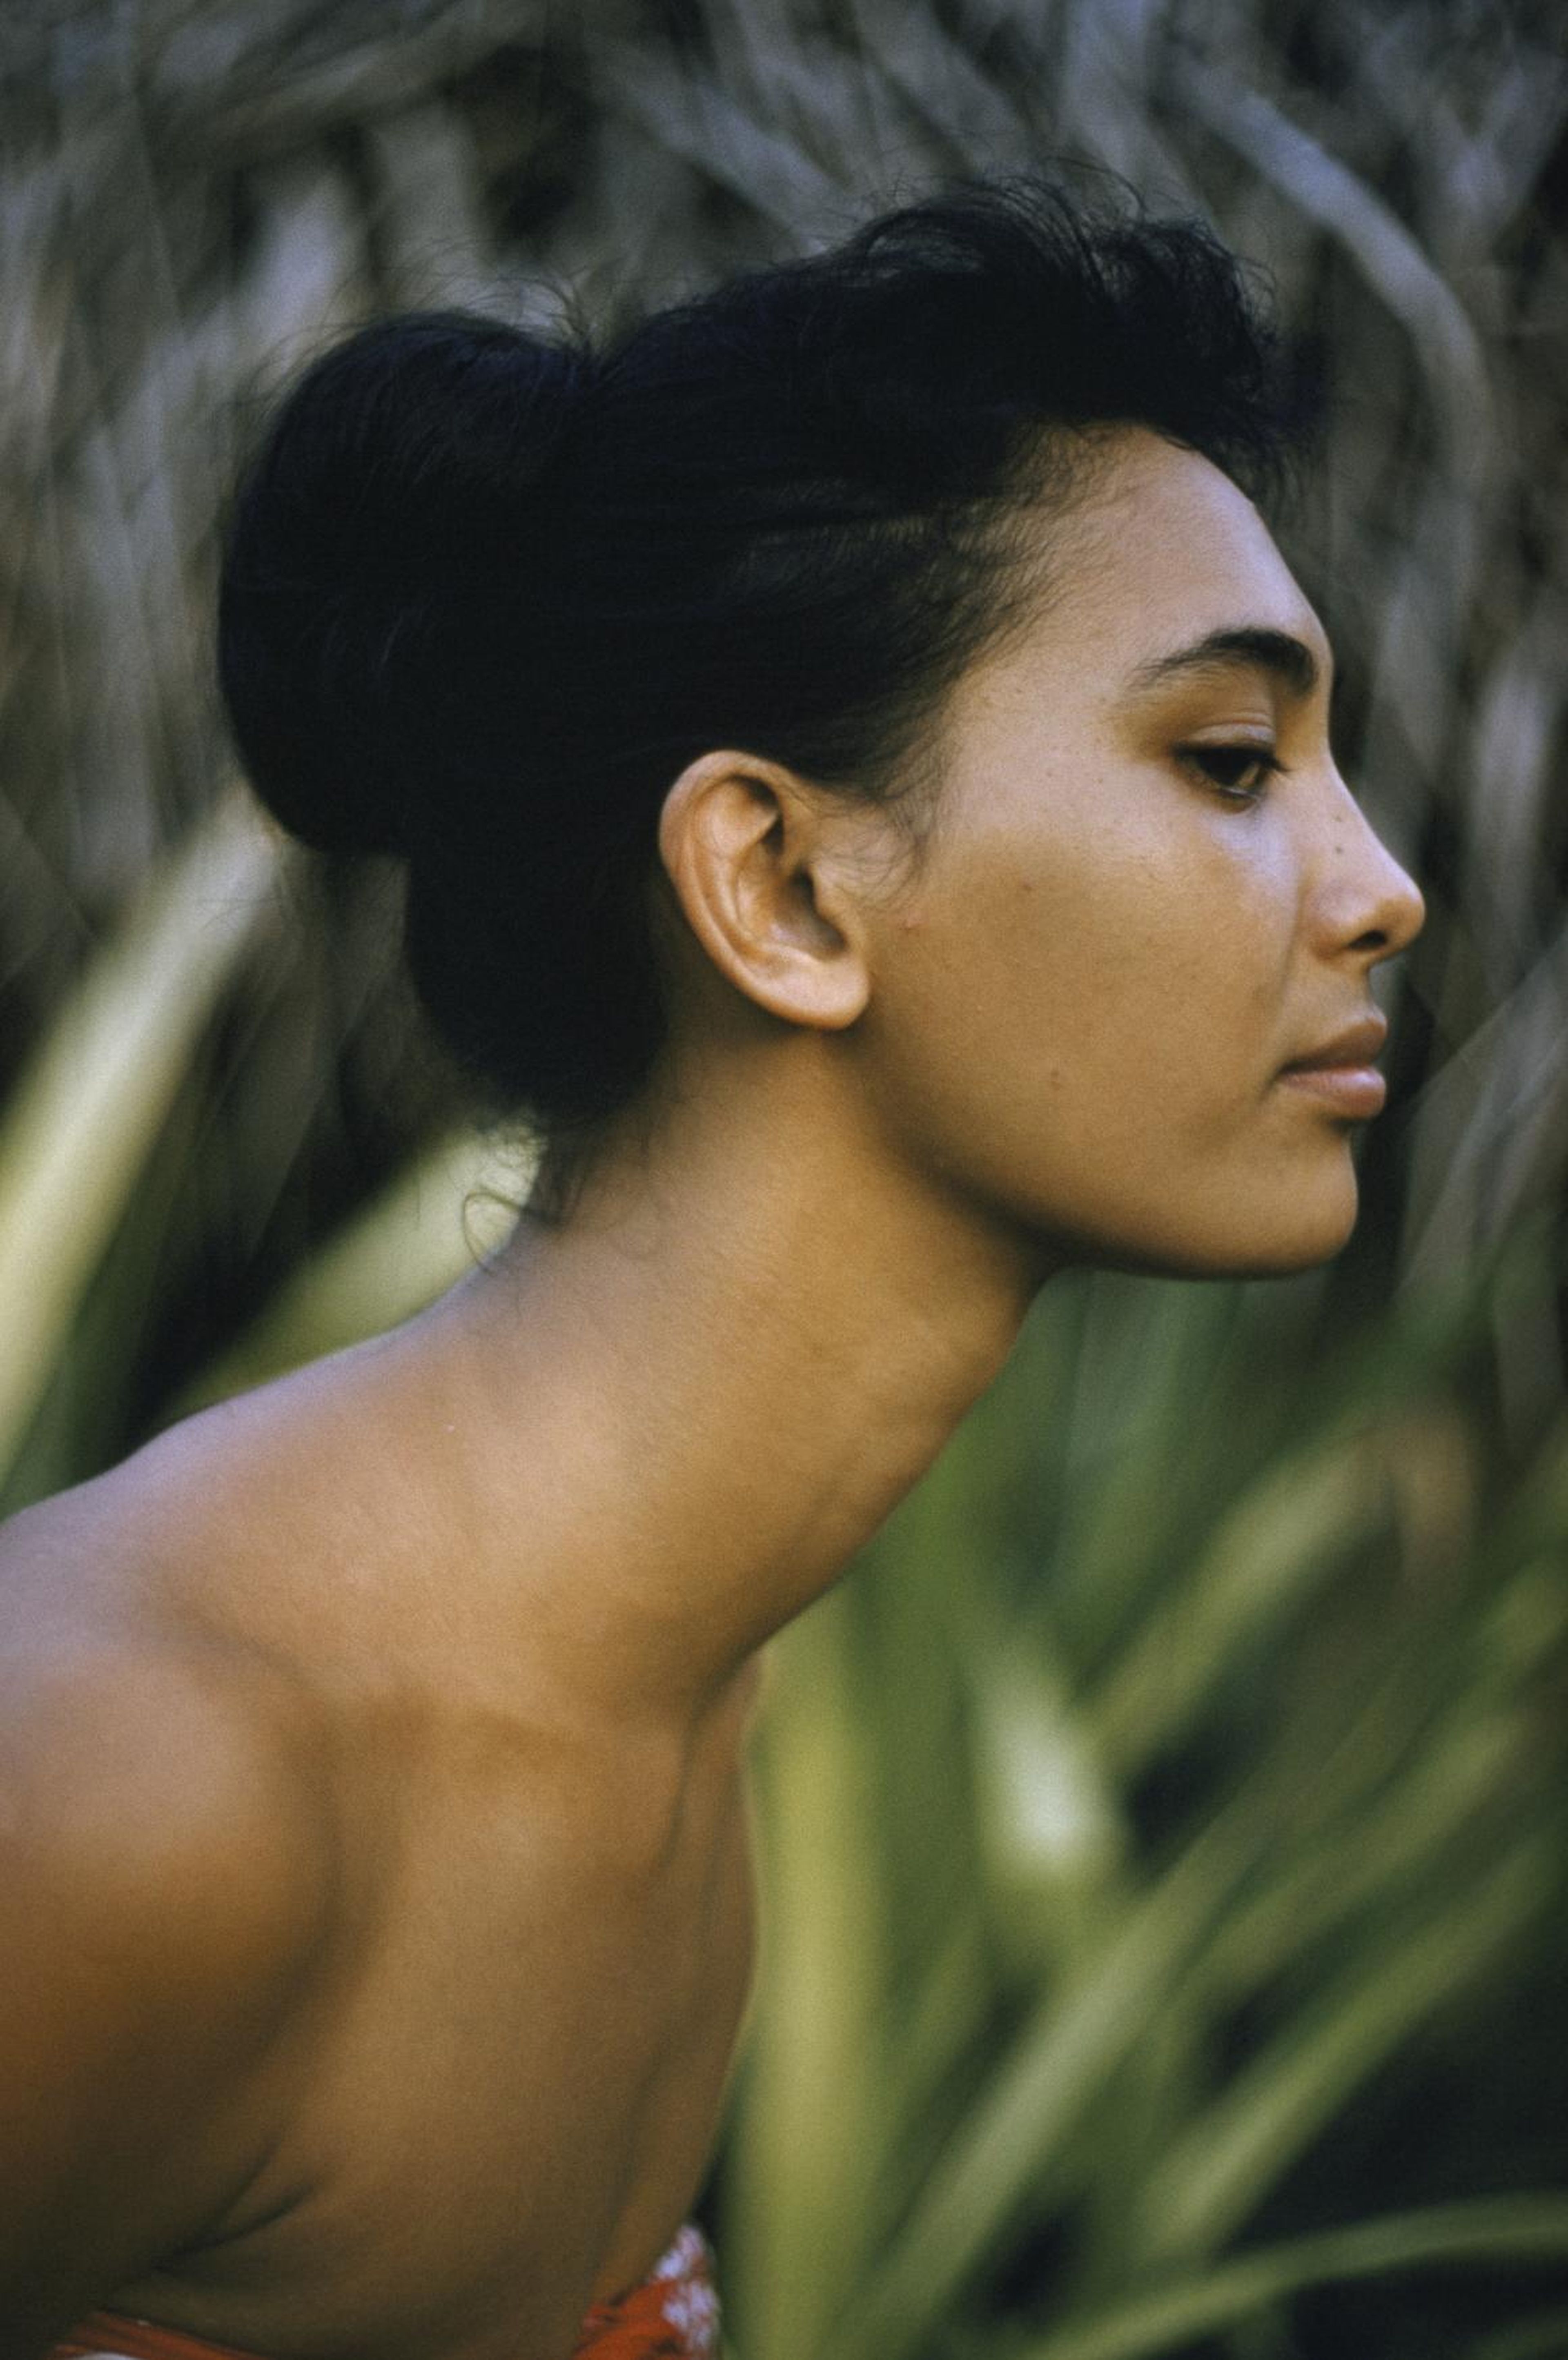 1960s: A Tahitian woman stands in profile.